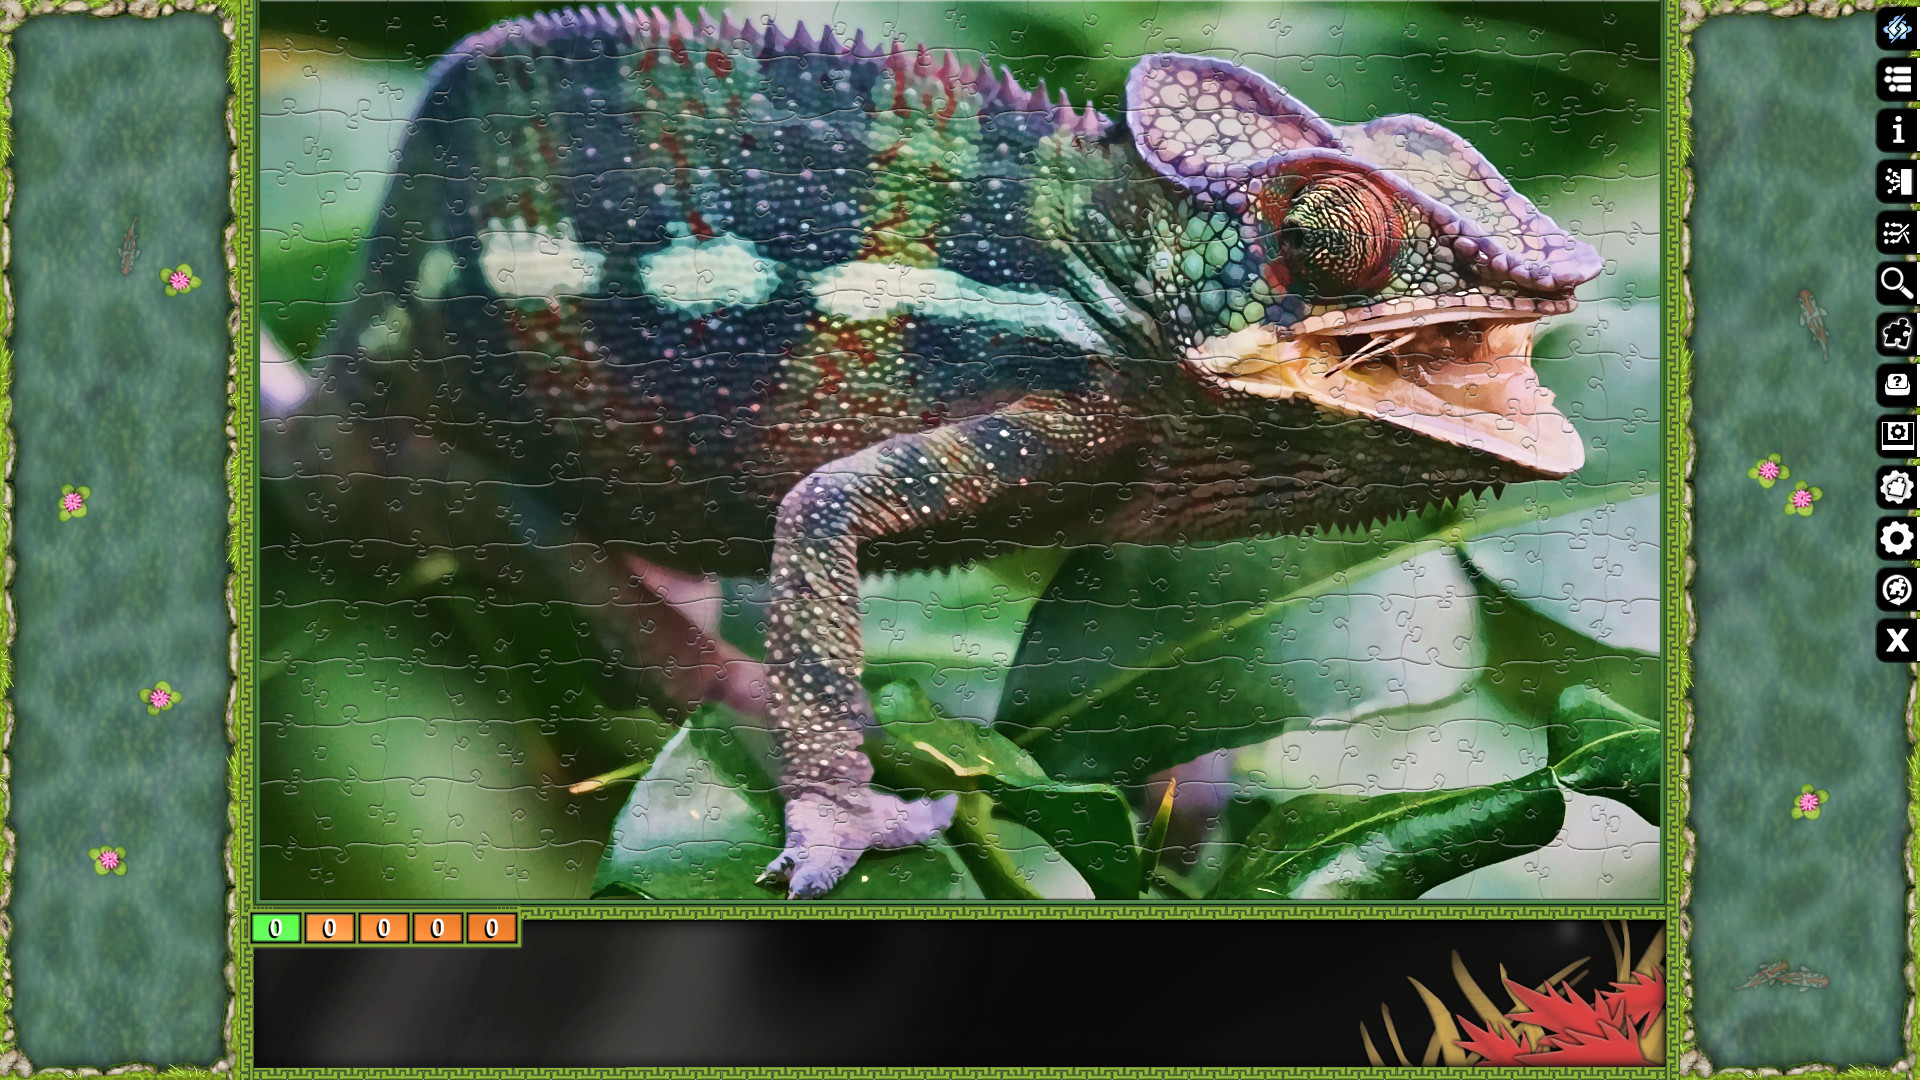 Jigsaw Puzzle Pack - Pixel Puzzles Ultimate: Reptile screenshot